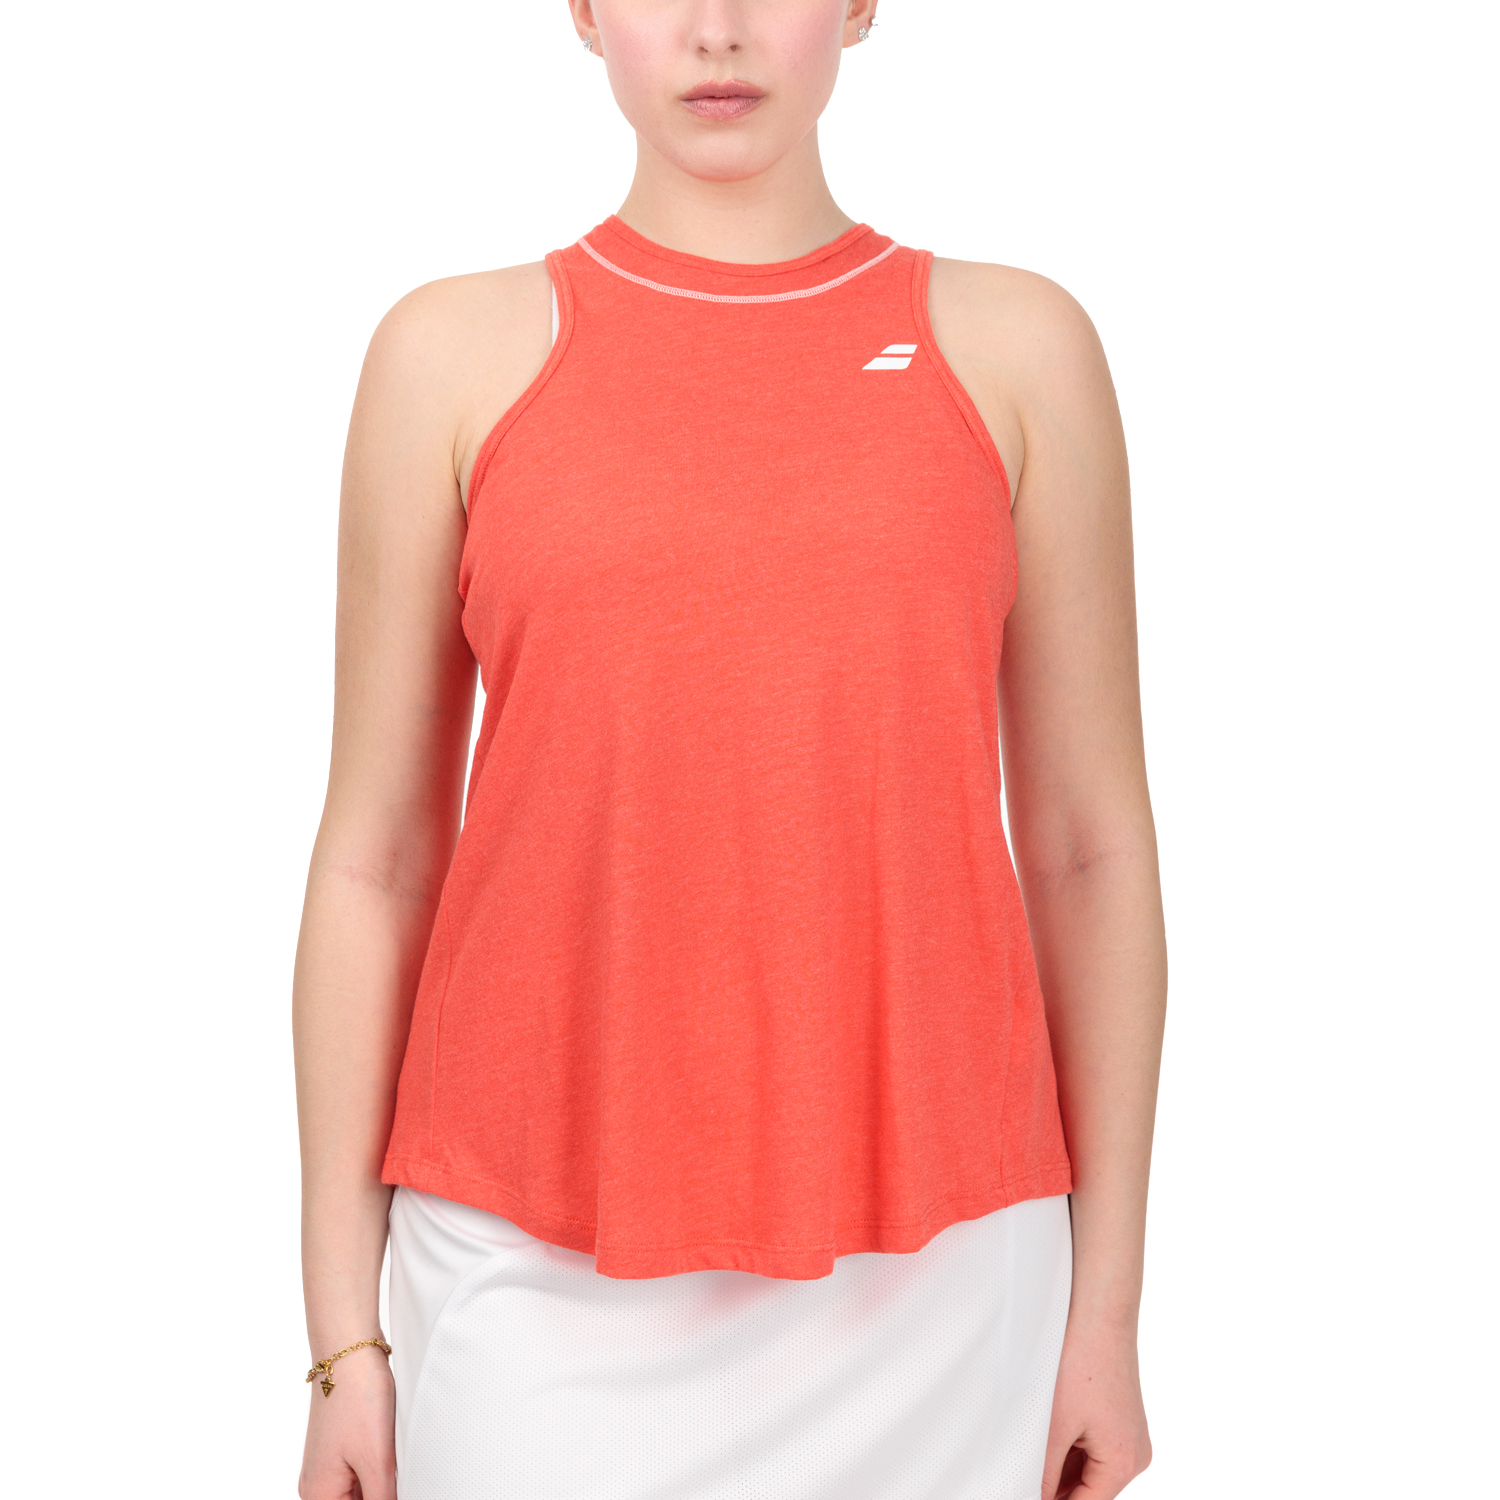 Babolat Exercise Top - Poppy Red Heather